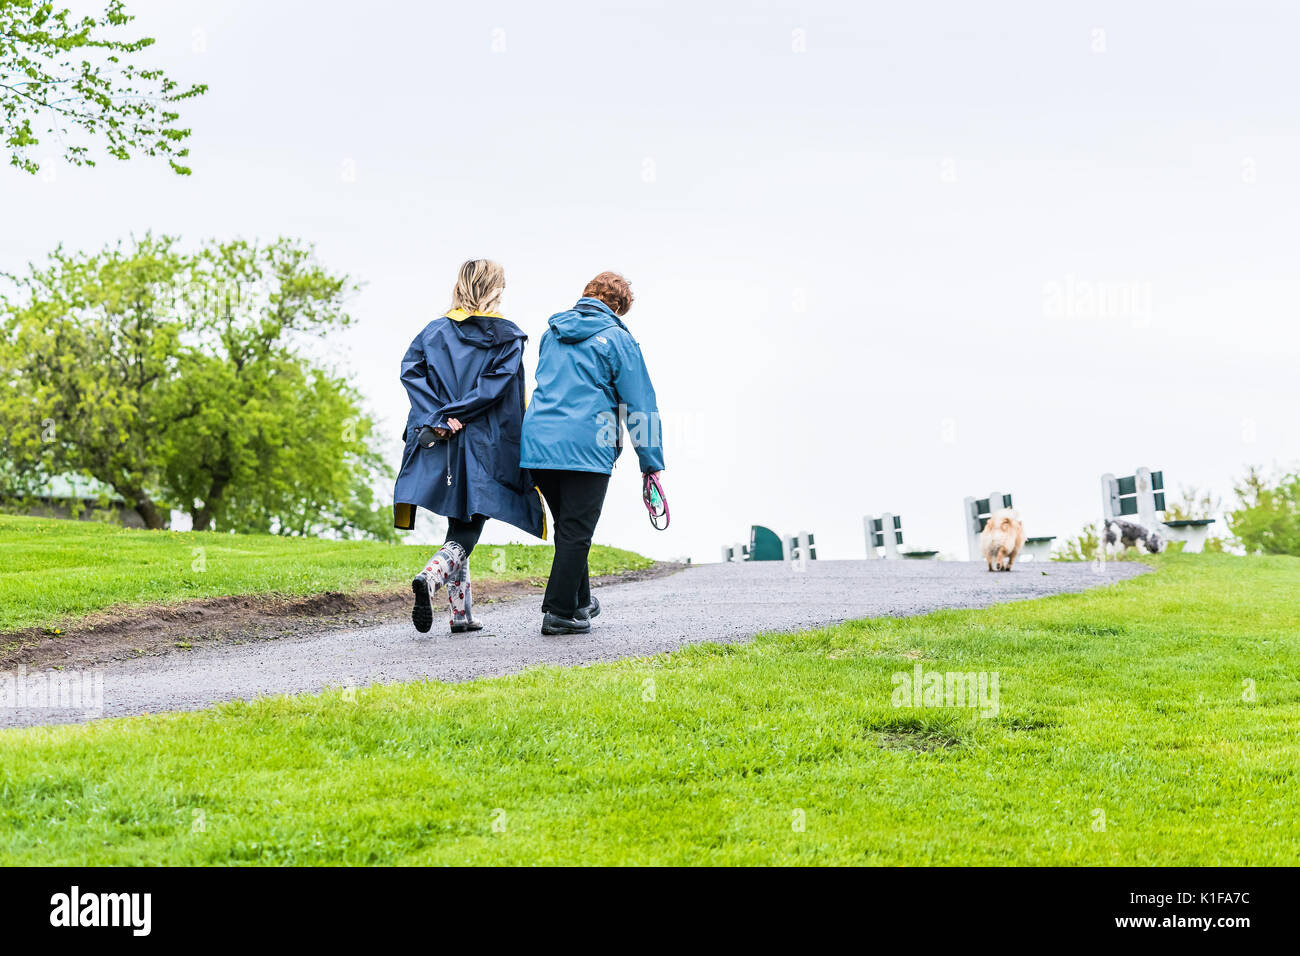 Quebec City, Canada - May 30, 2017: Two women walking on trail path street in plaines d'Abraham in morning during rainy day with dogs Stock Photo